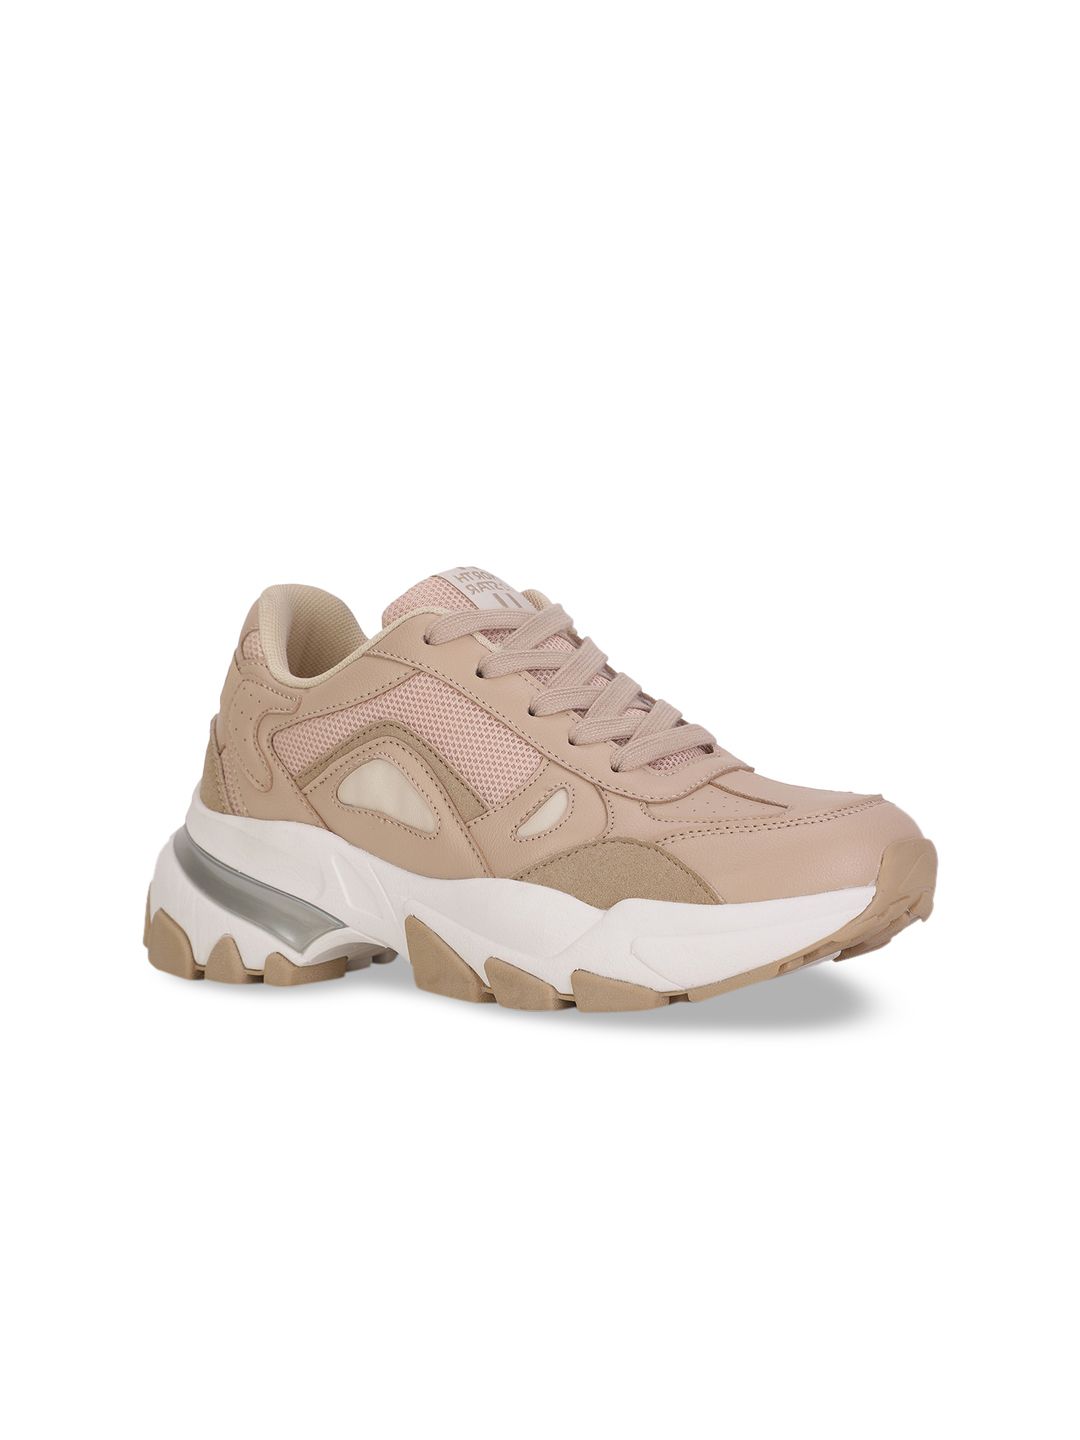 North Star Women Beige Colourblocked PU Sneakers Price in India